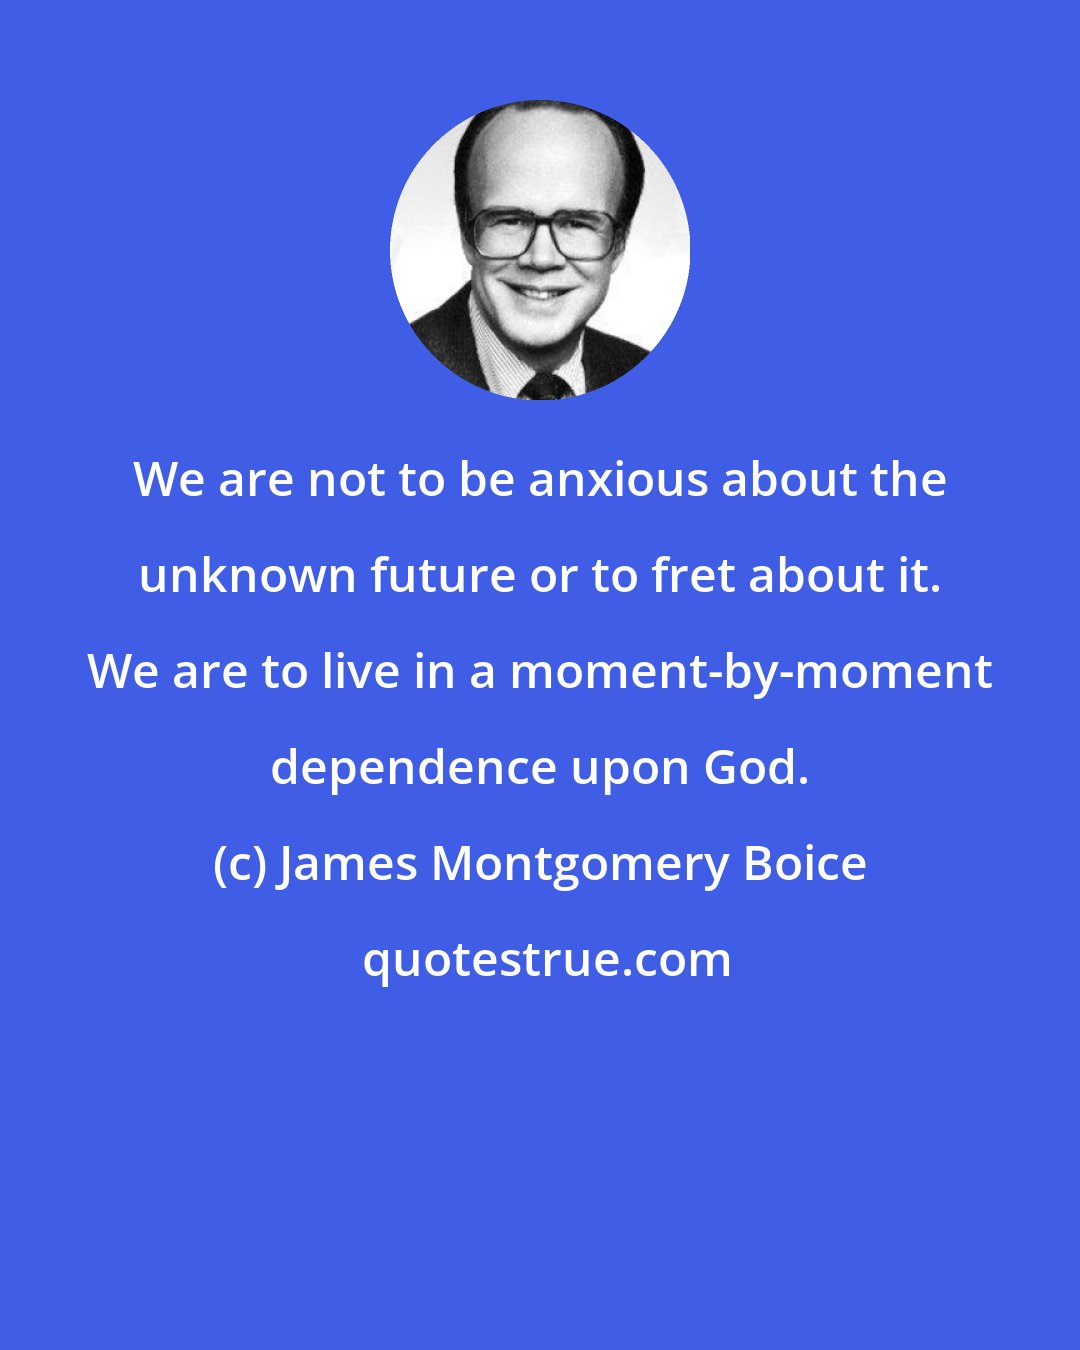 James Montgomery Boice: We are not to be anxious about the unknown future or to fret about it. We are to live in a moment-by-moment dependence upon God.